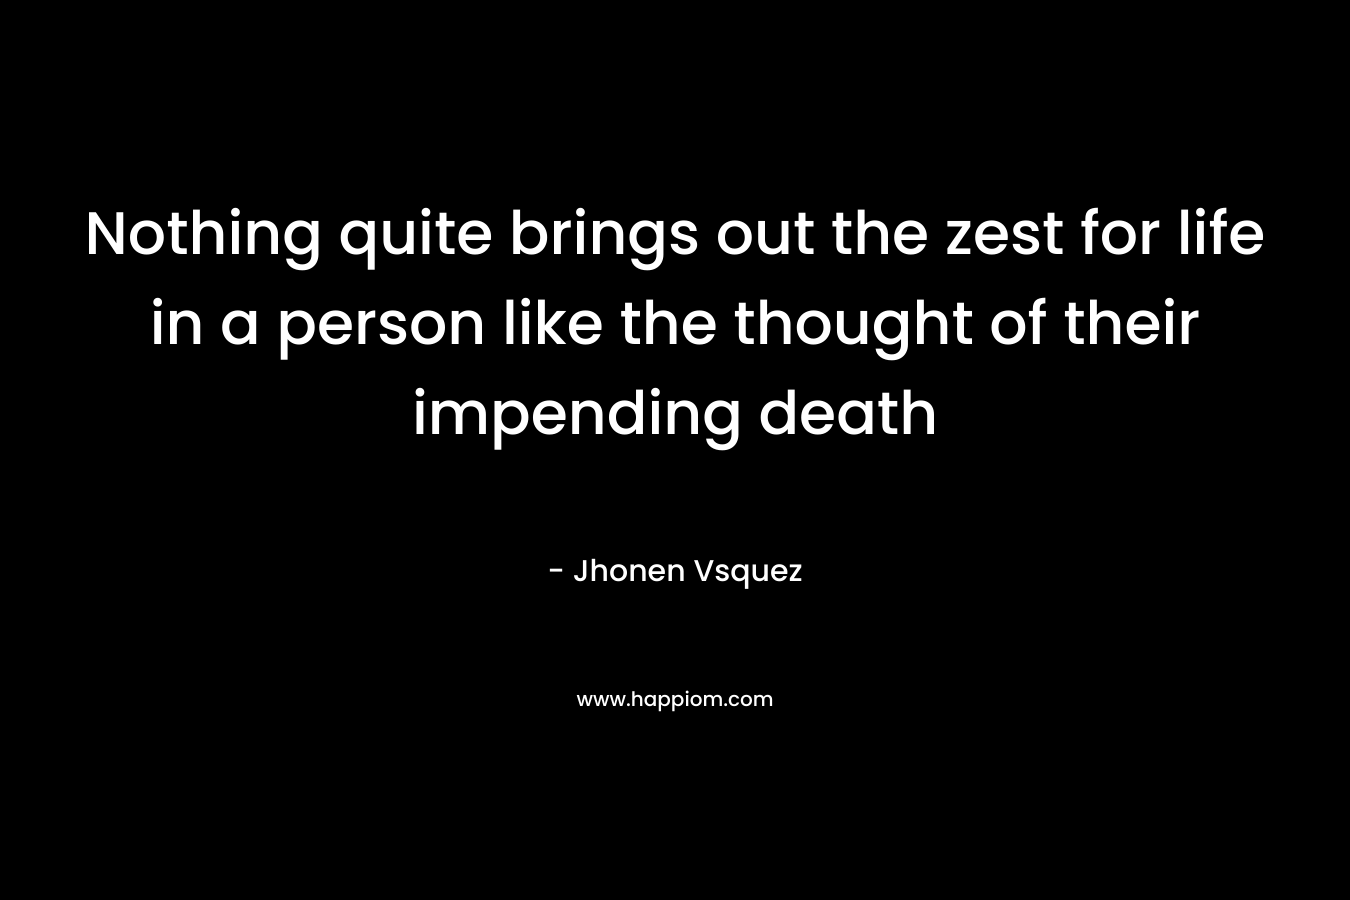 Nothing quite brings out the zest for life in a person like the thought of their impending death – Jhonen Vsquez